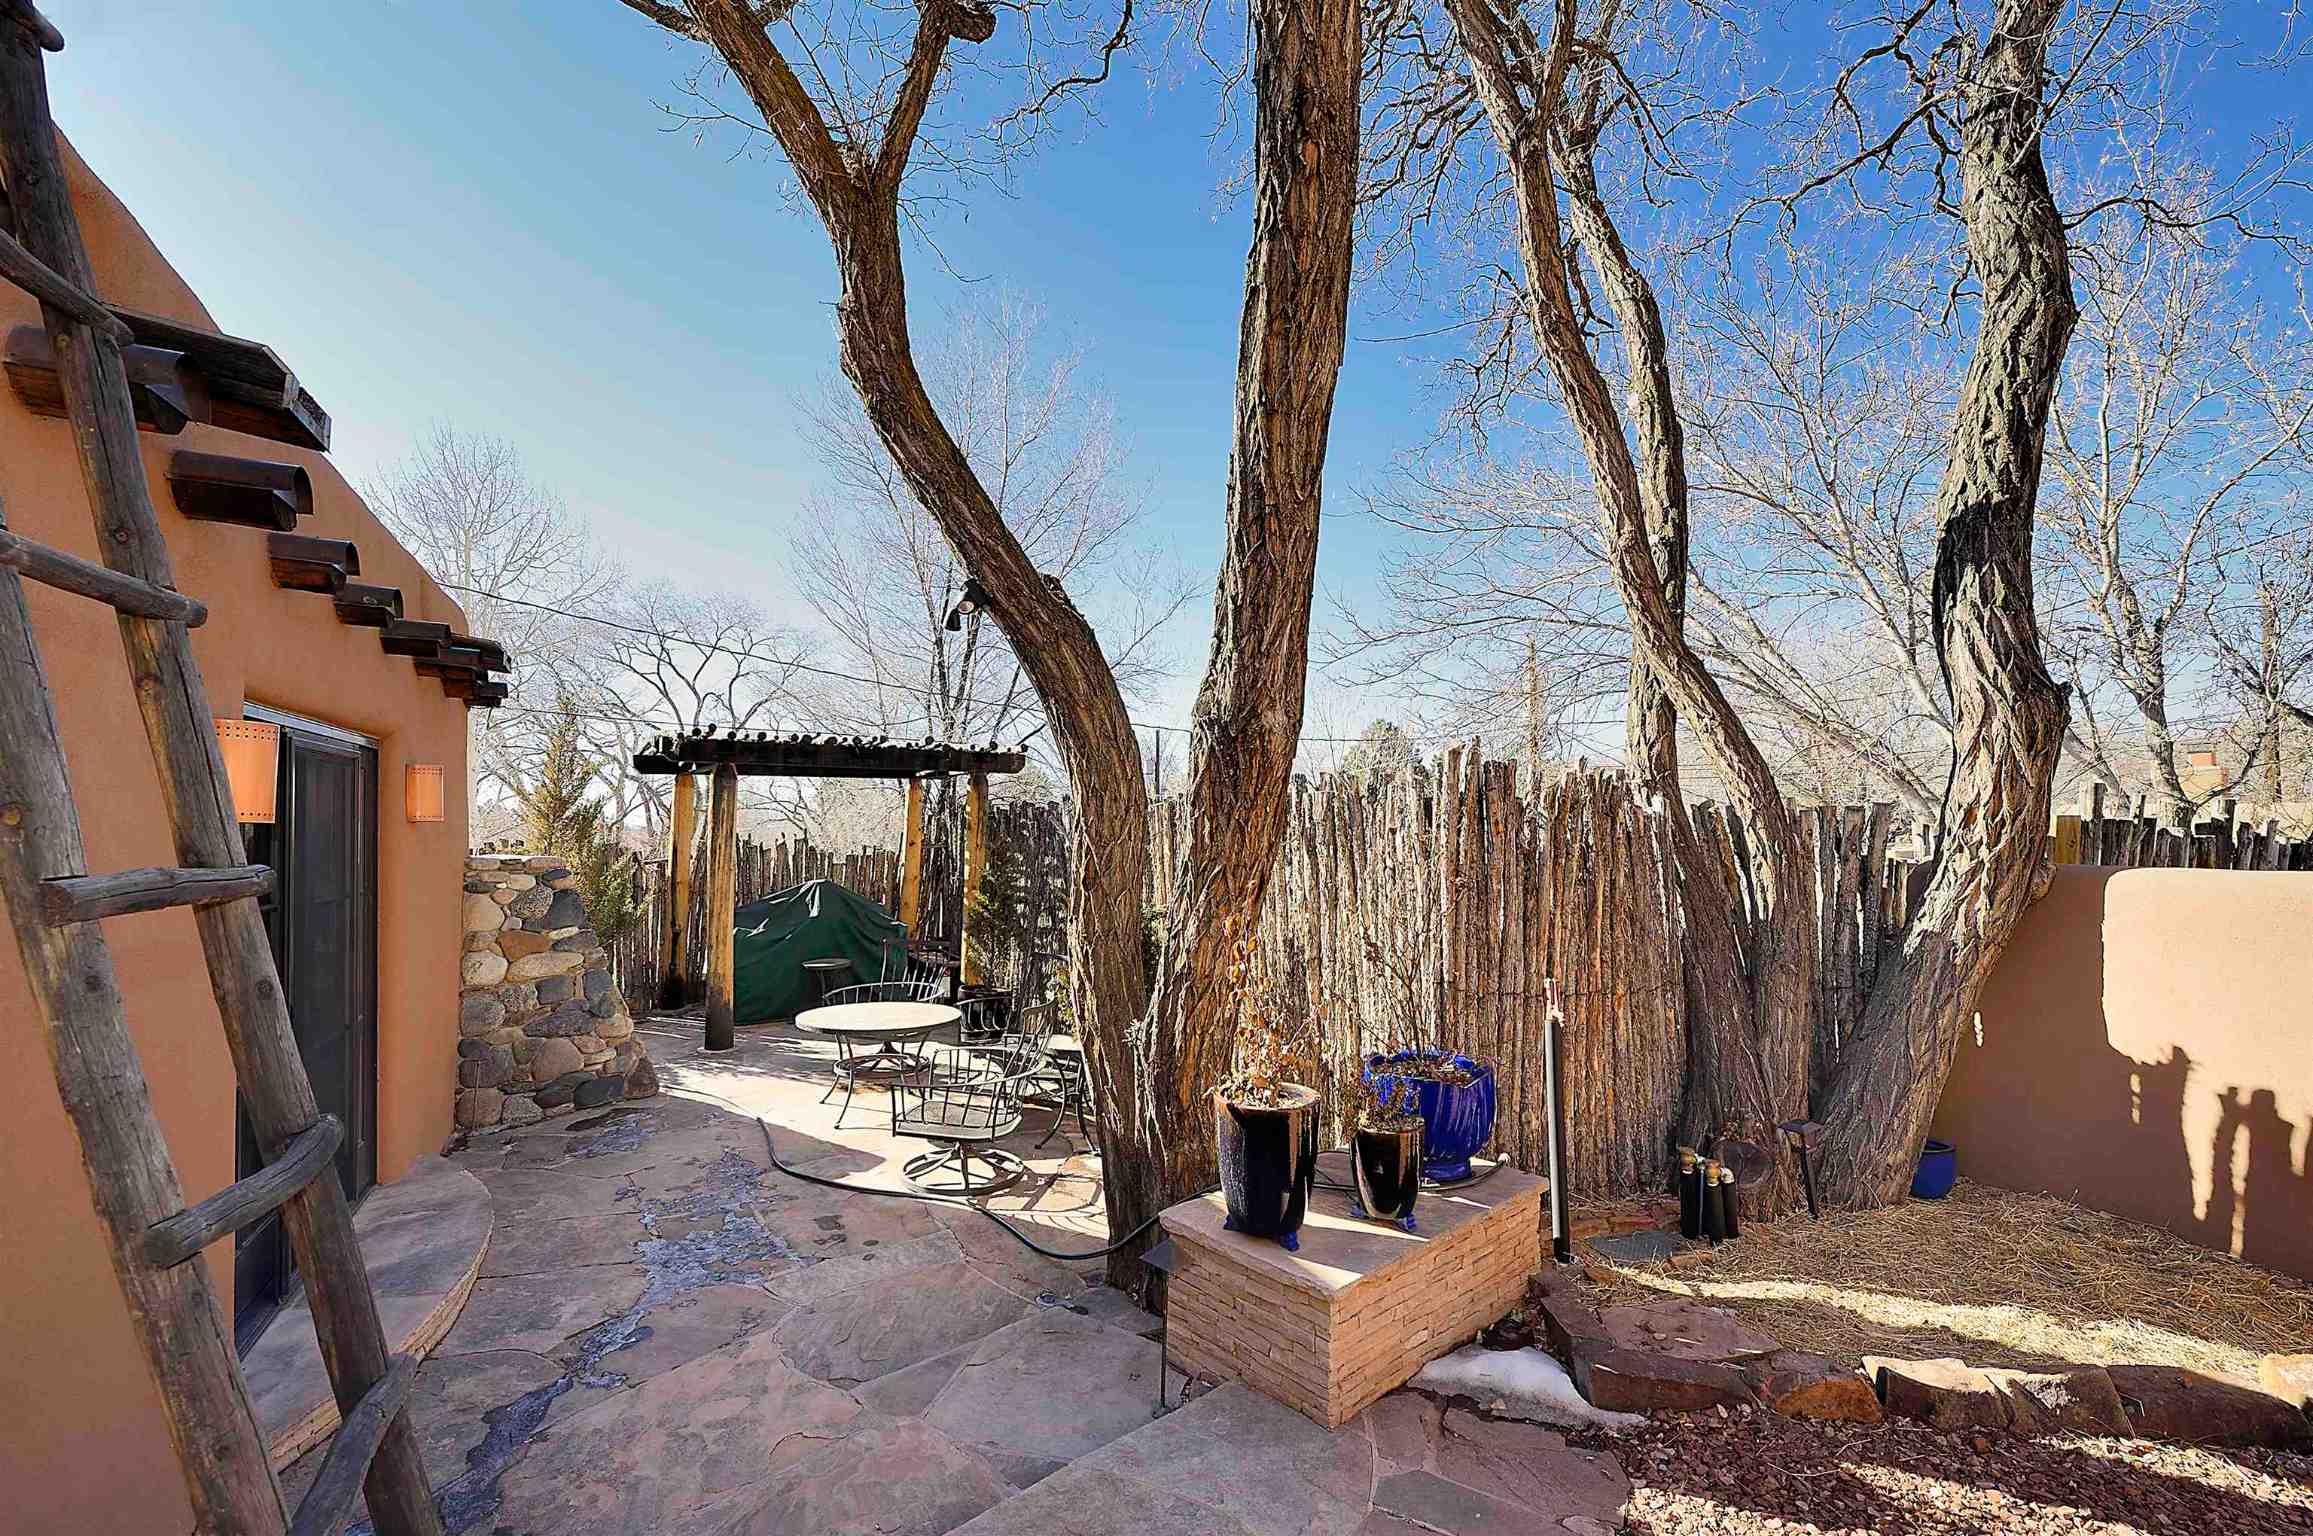 849 E Palace, Santa Fe, New Mexico 87501, 2 Bedrooms Bedrooms, ,2 BathroomsBathrooms,Residential,For Sale,849 E Palace,202200928